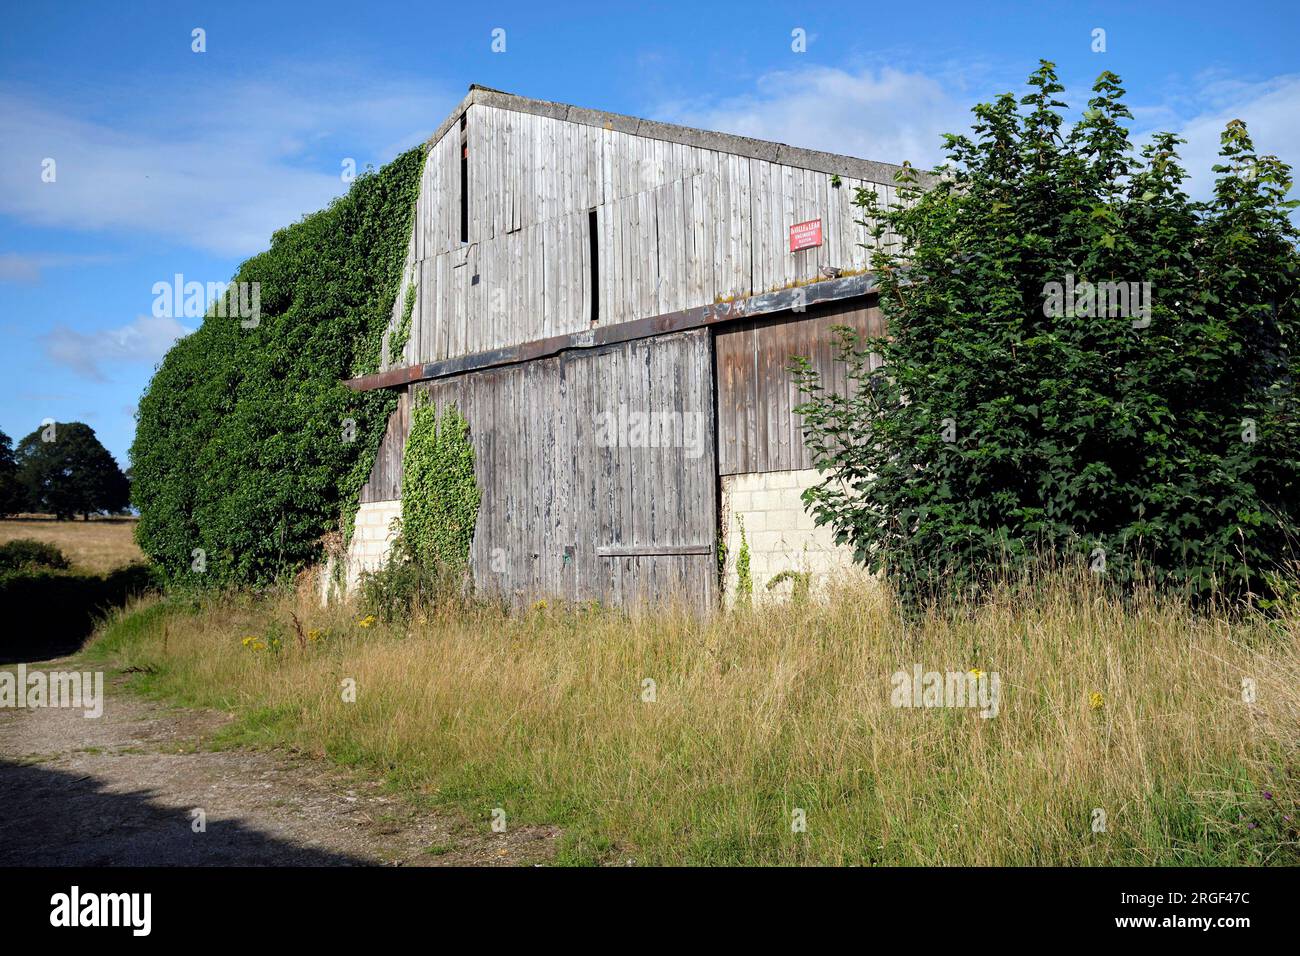 An old wooden agricultural barn, Rural community of Womersley, North Yorkshire, northern England, UK Stock Photo